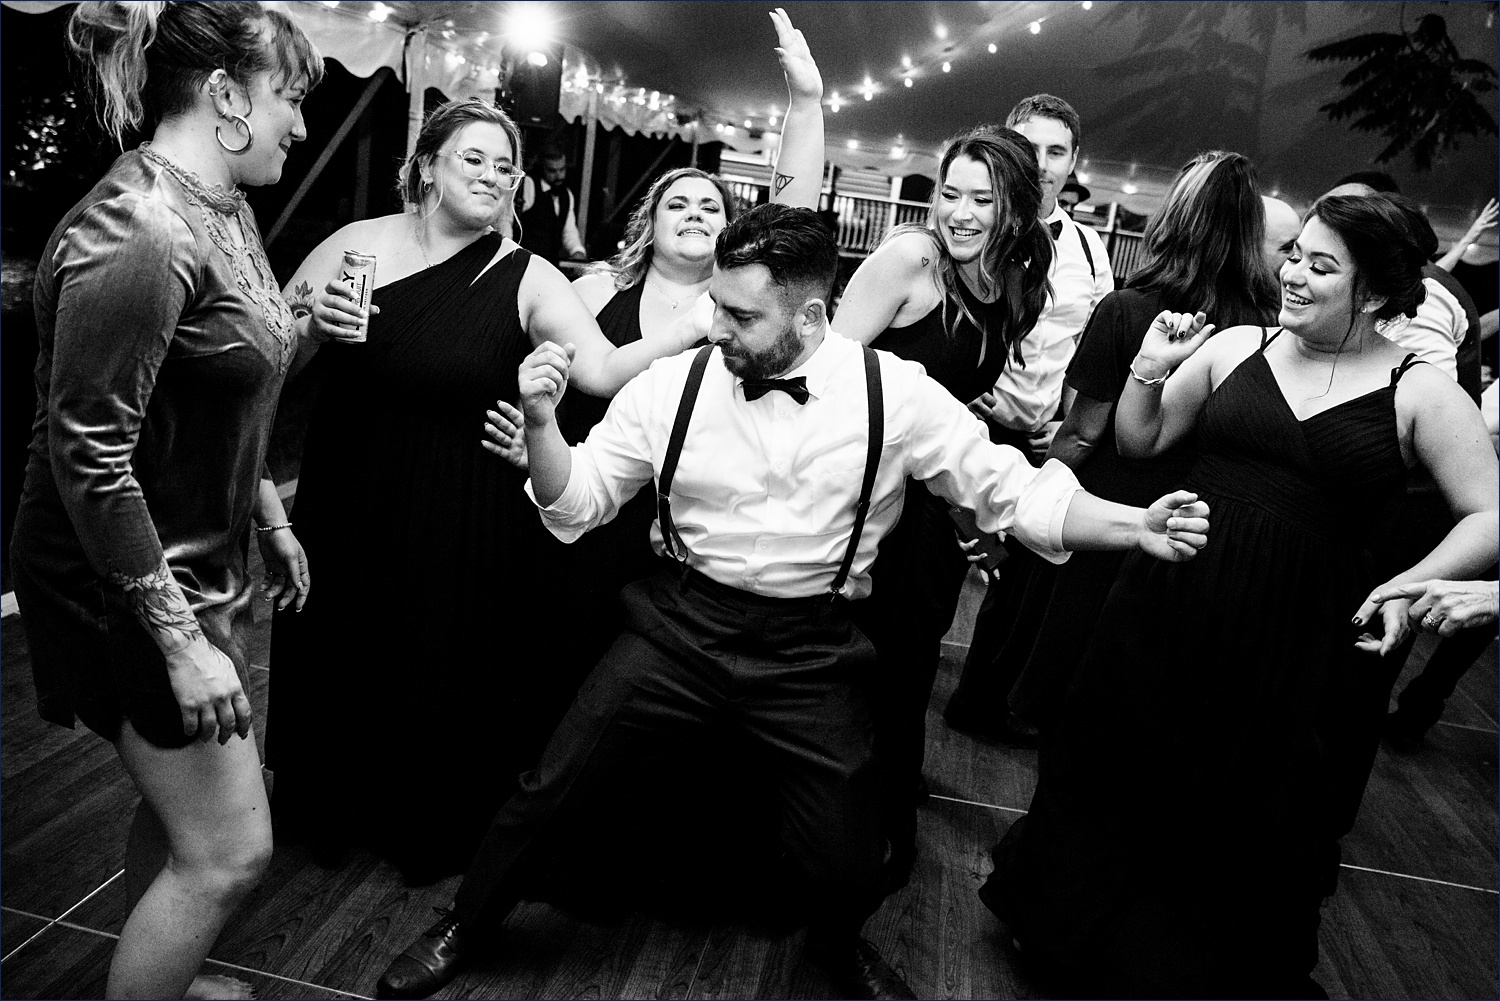 The groom parties with the bridesmaids on the dance floor